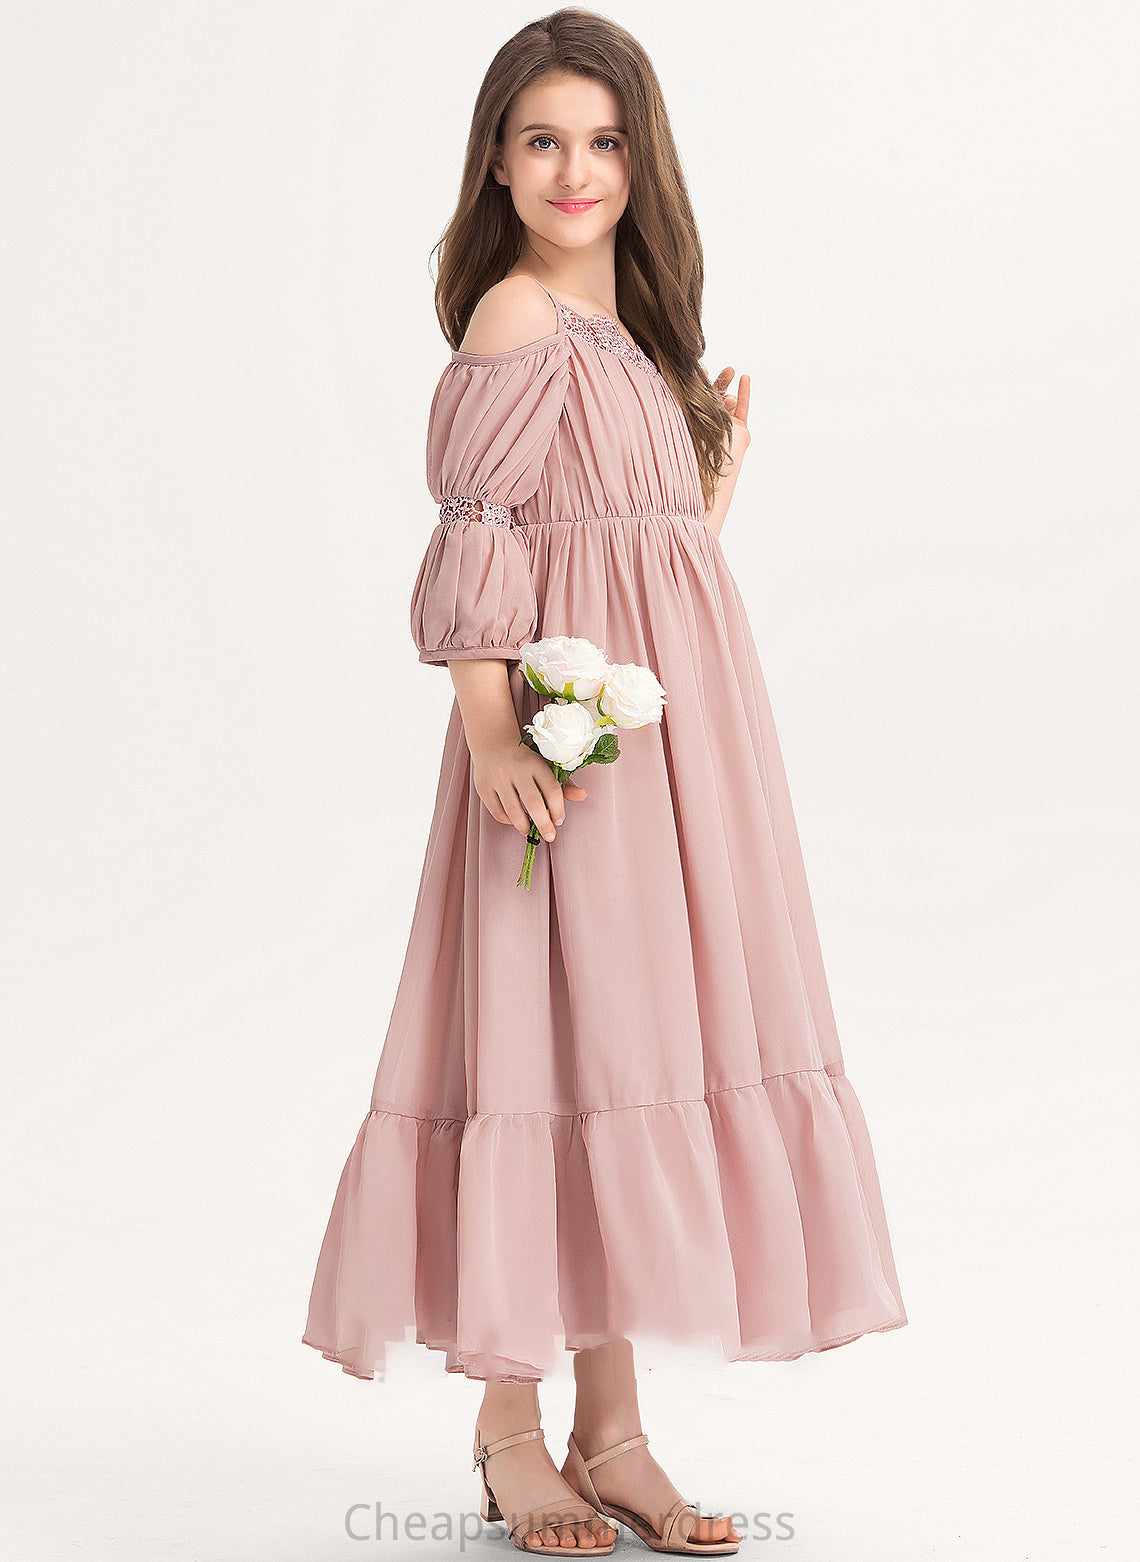 With Square Lace Neckline Junior Bridesmaid Dresses A-Line Ruffle Ankle-Length Chiffon Braelyn